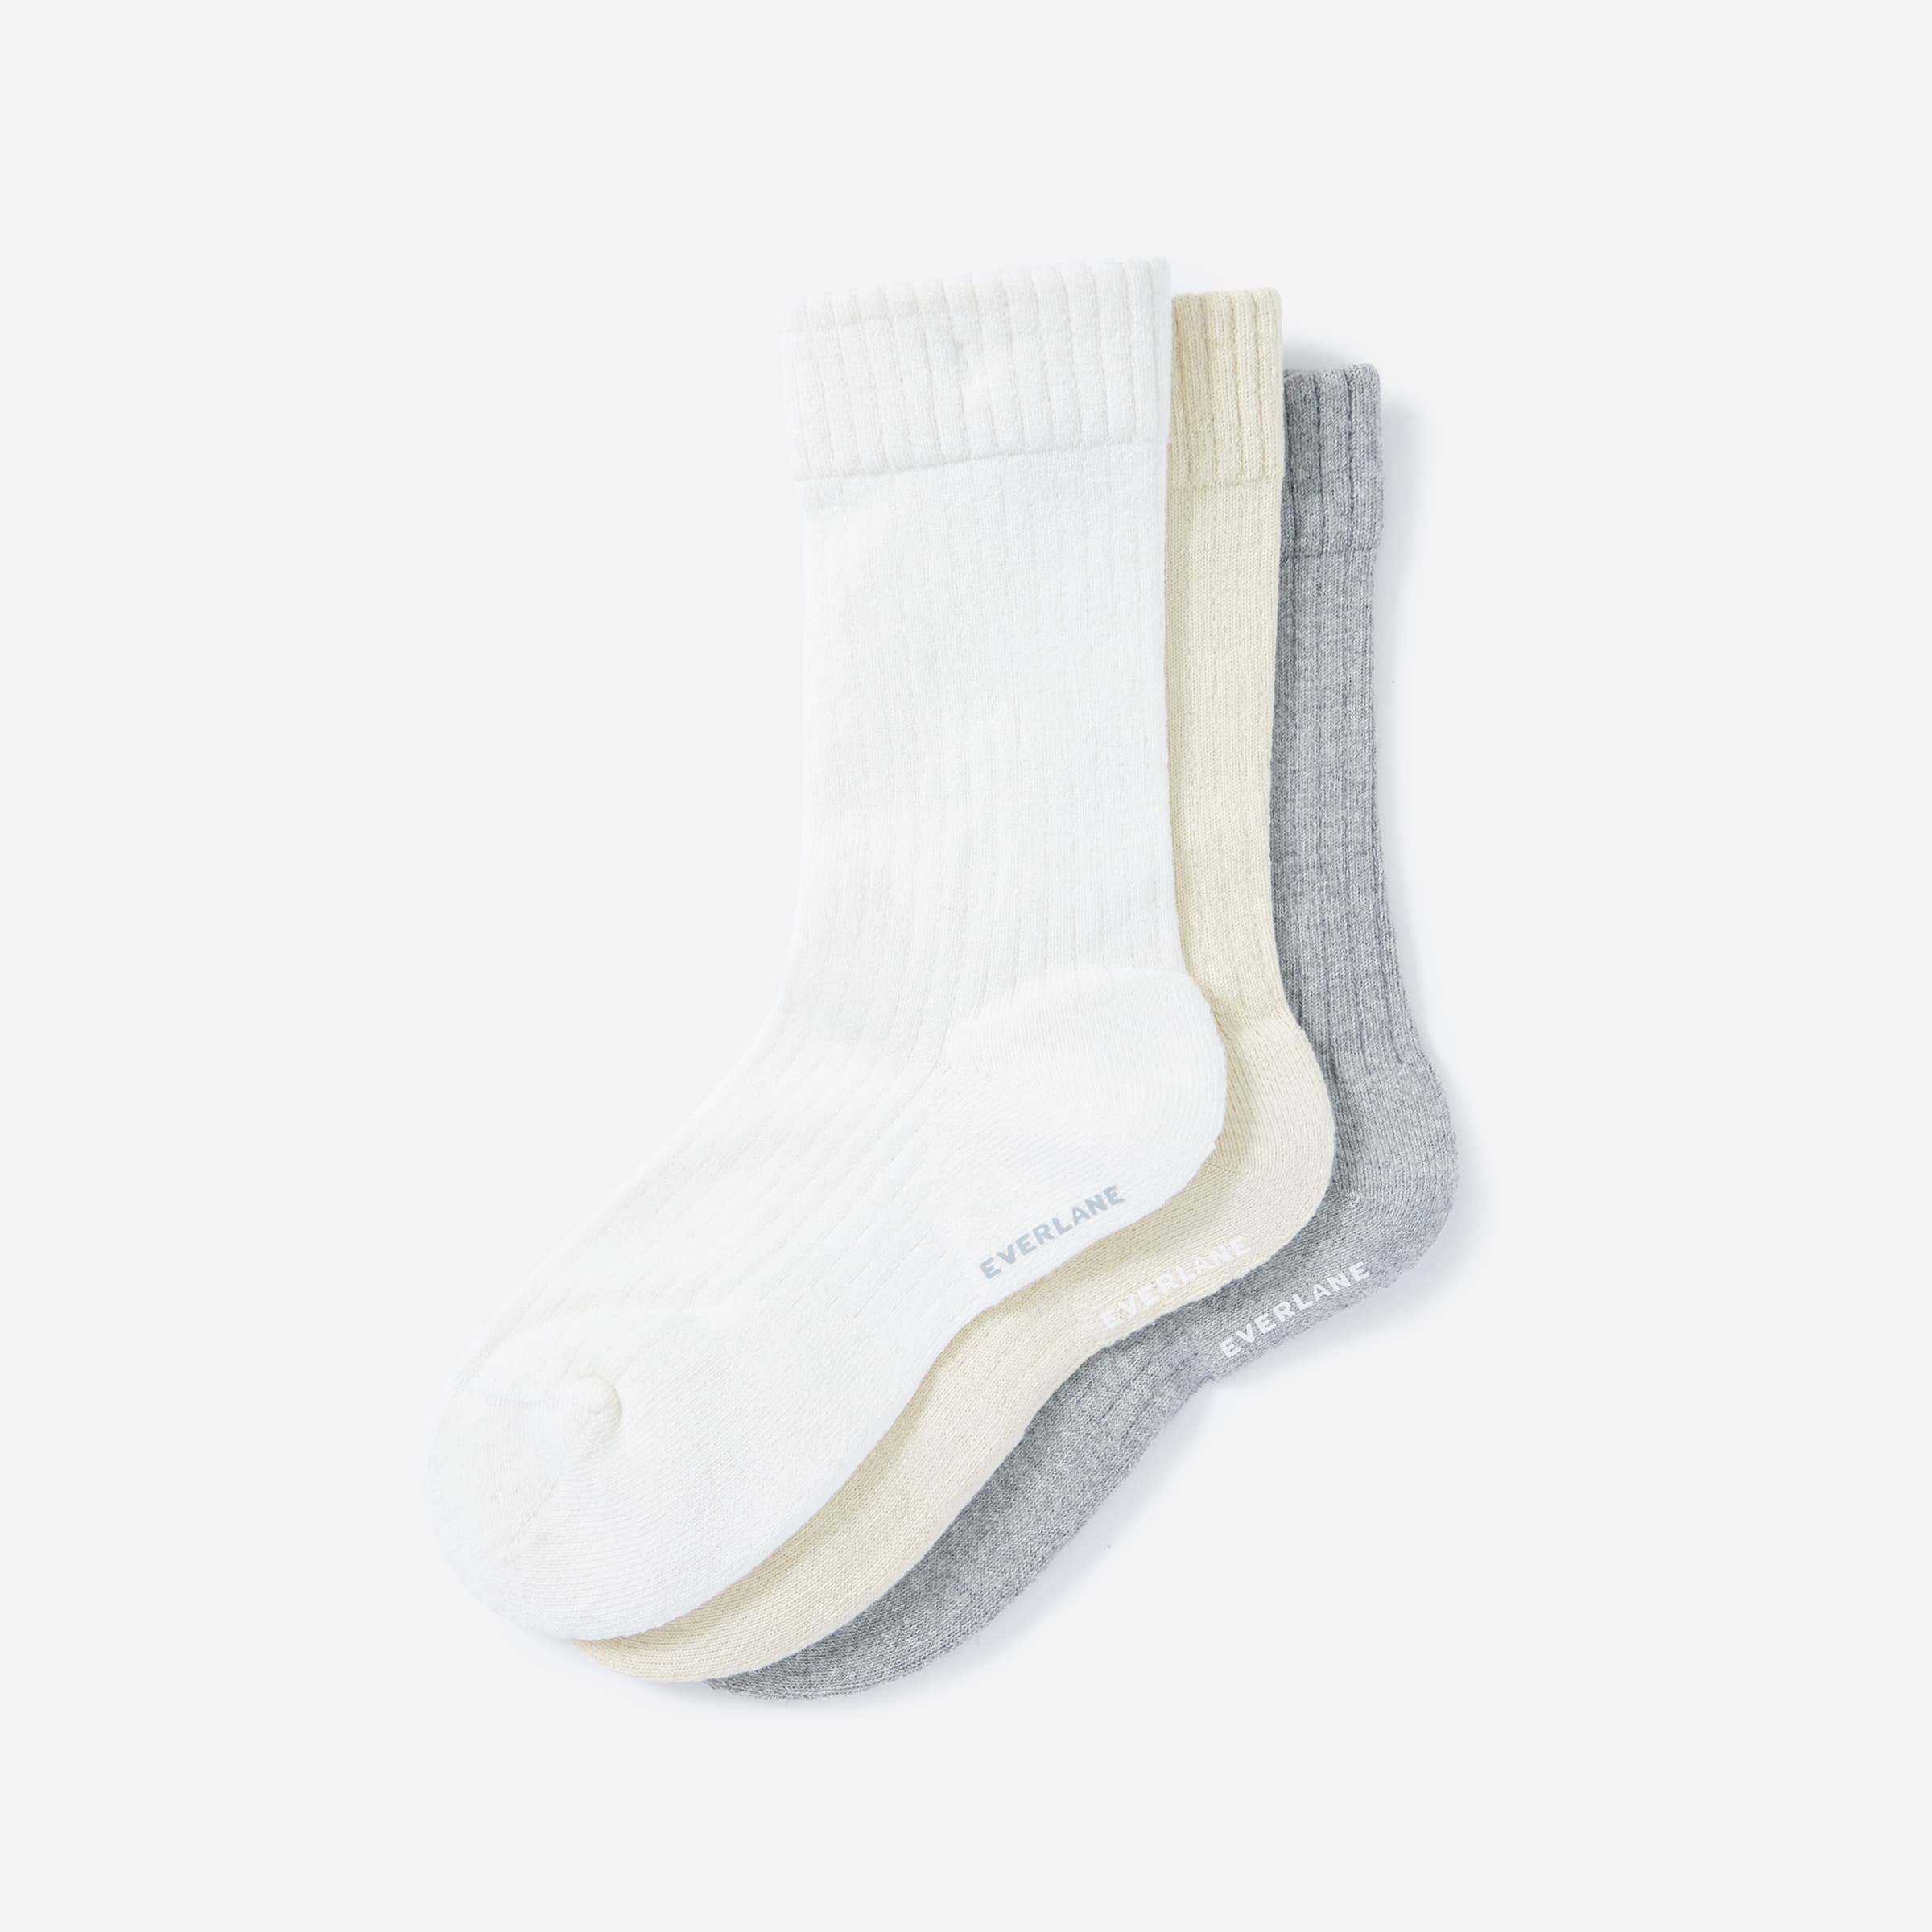 Men's Crew Socks | Durable Organic Cotton | Natural White | Size M | Made in USA | Vegan, Ethical Clothing | Harvest & Mill